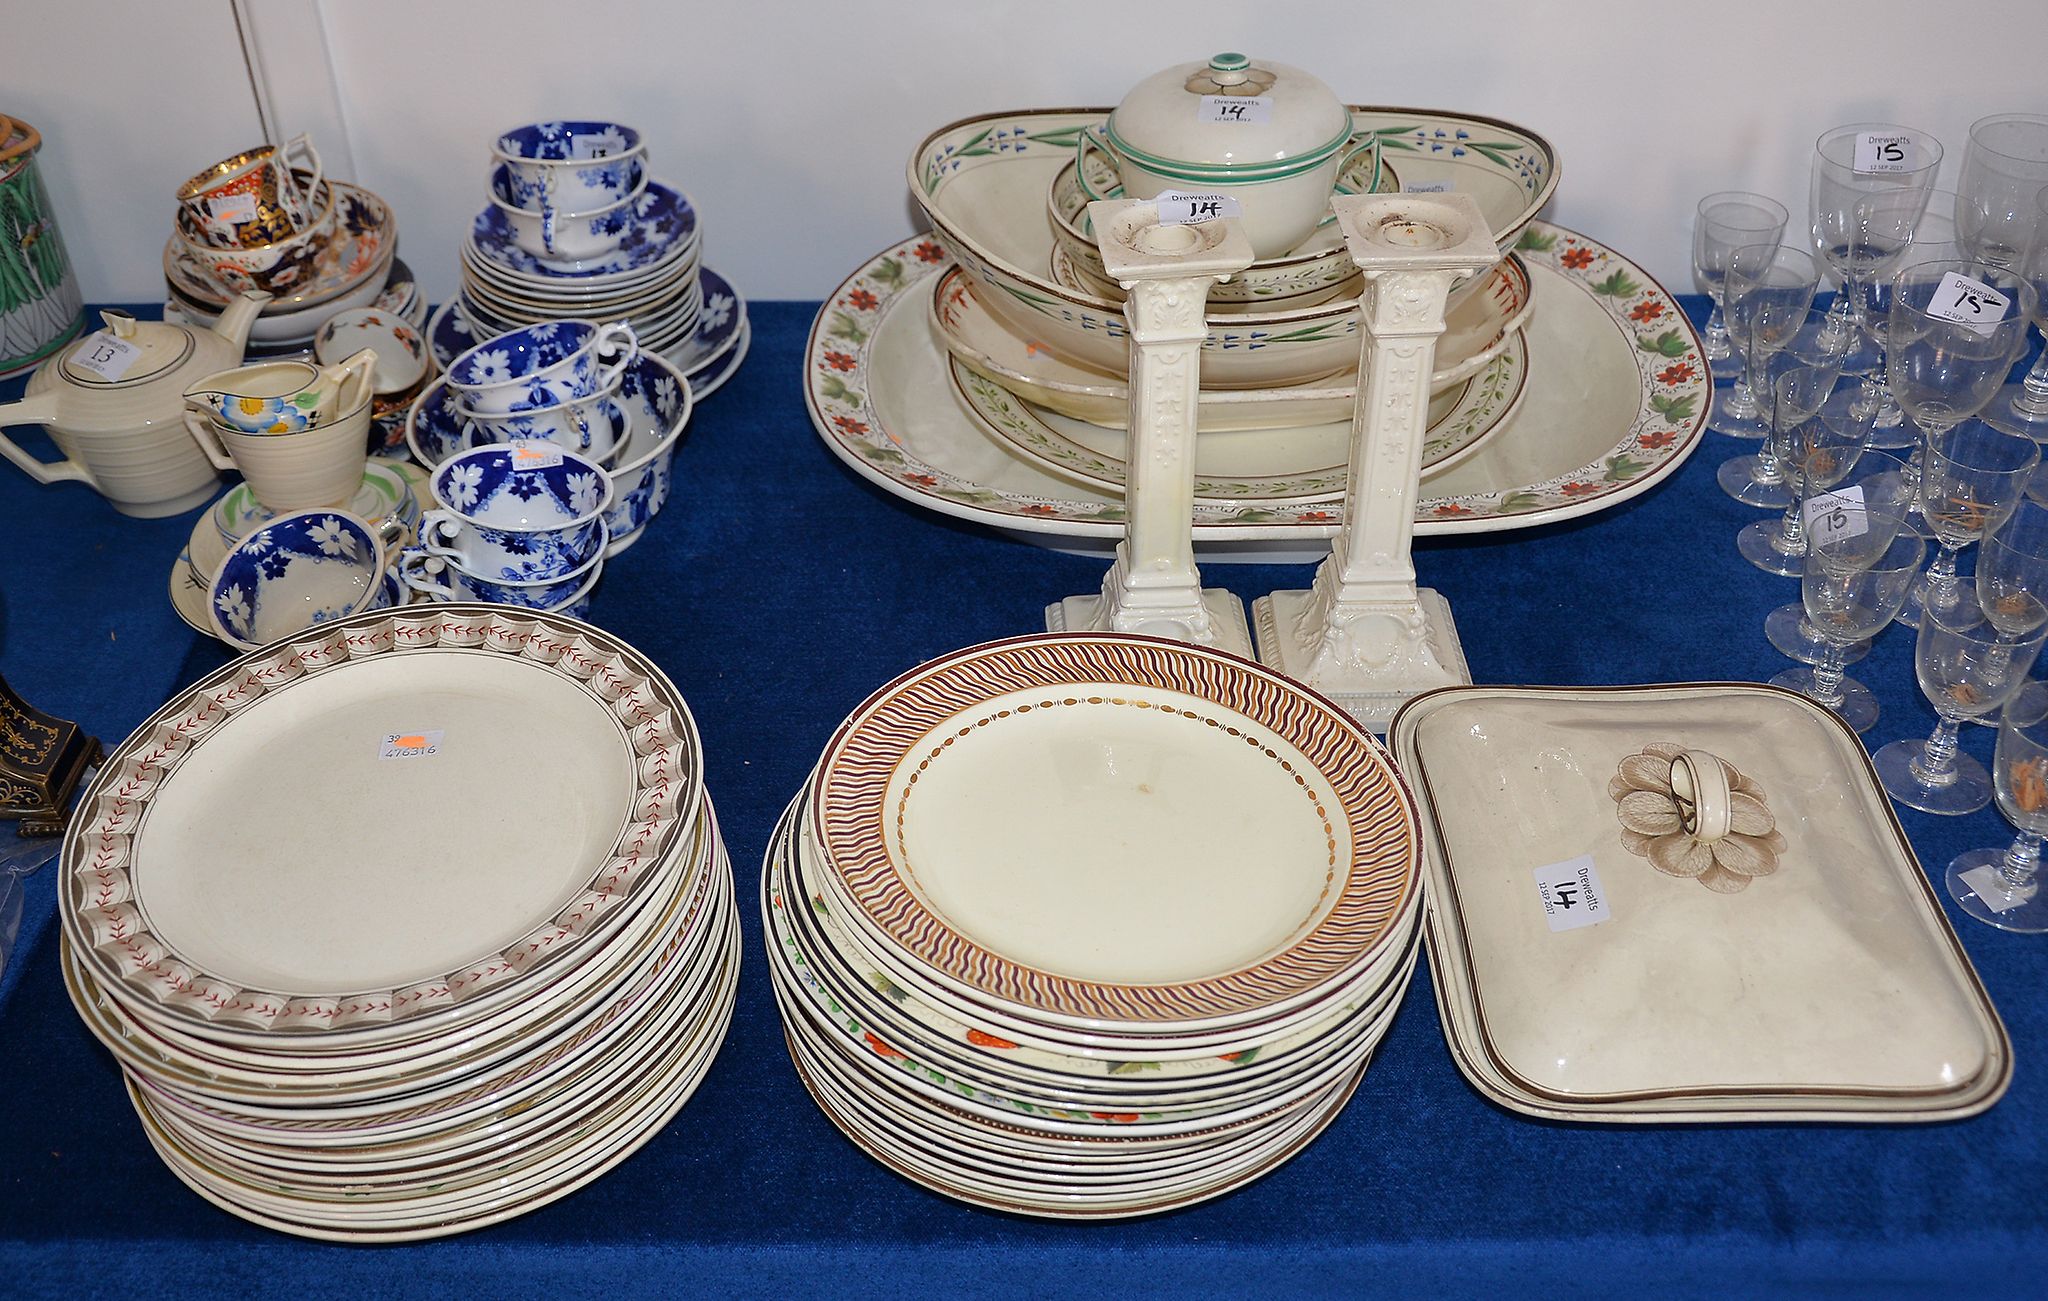 An assortment of mostly Wedgwood Queen's ware, circa 1800, including plates, dishes, bowls etc,